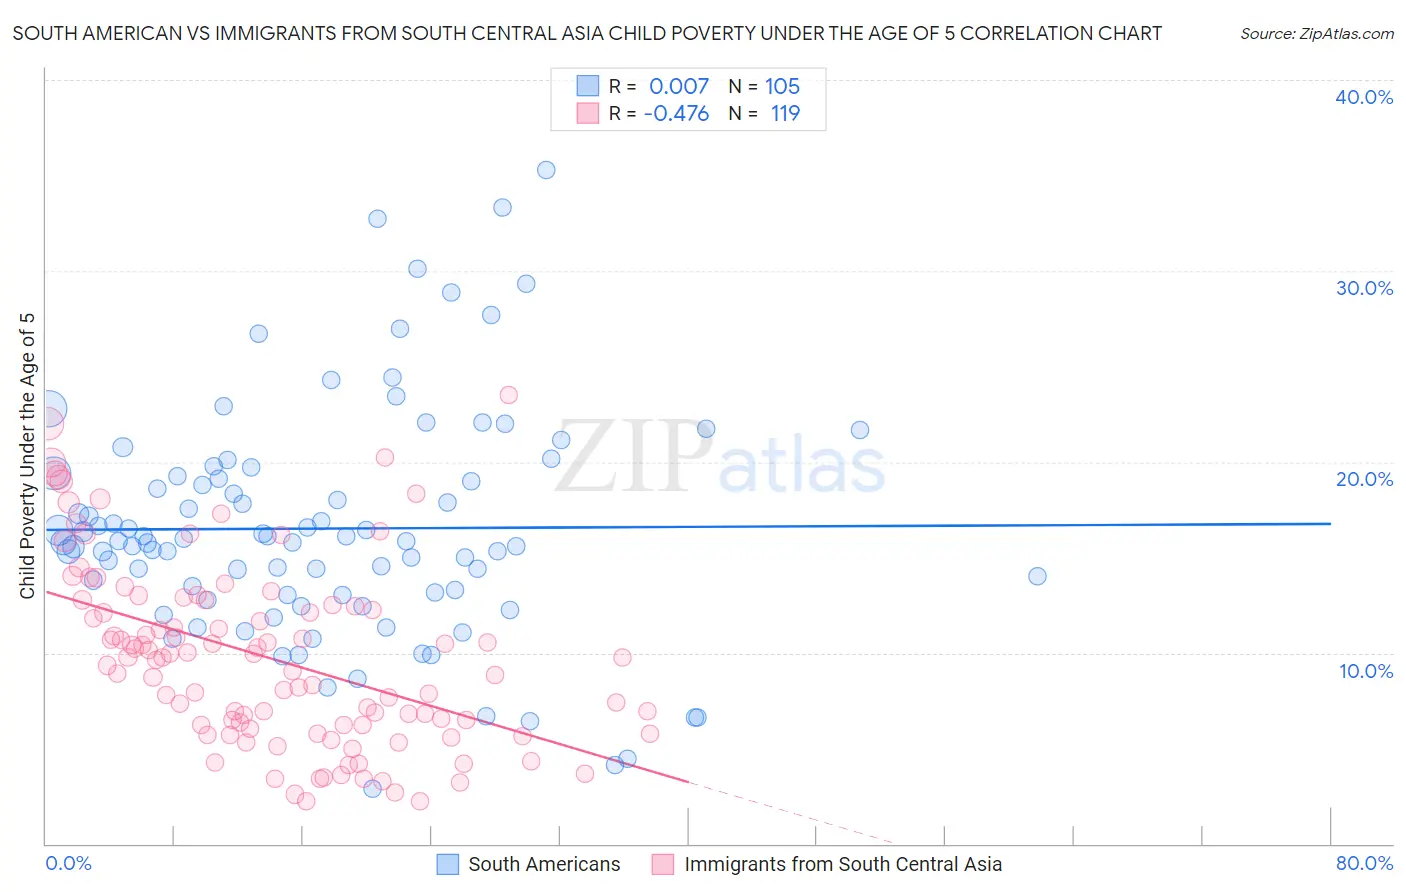 South American vs Immigrants from South Central Asia Child Poverty Under the Age of 5